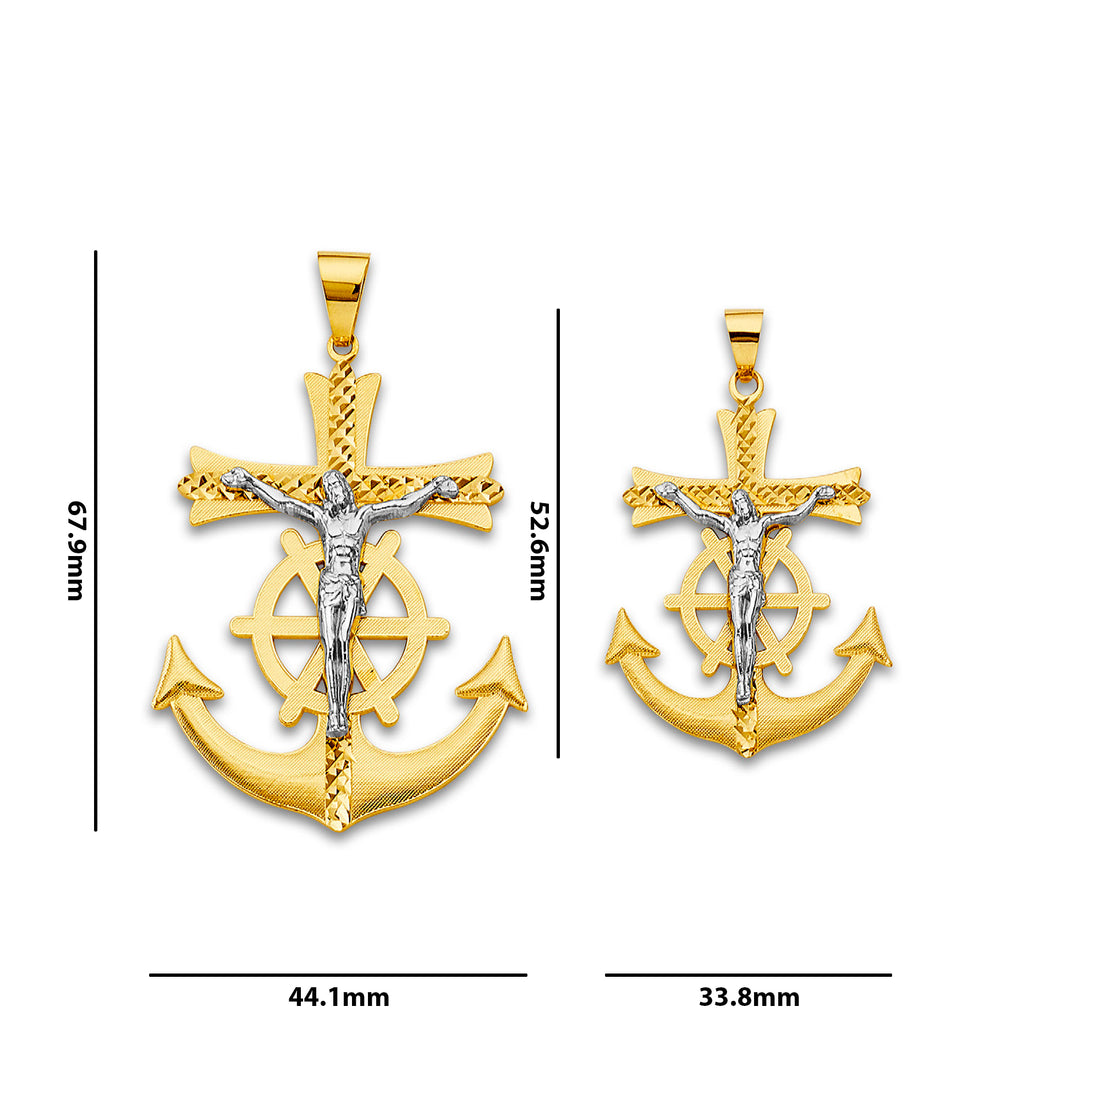 Two Tone Gold Mariner Anchor Cross Crucifix Religious Pendant